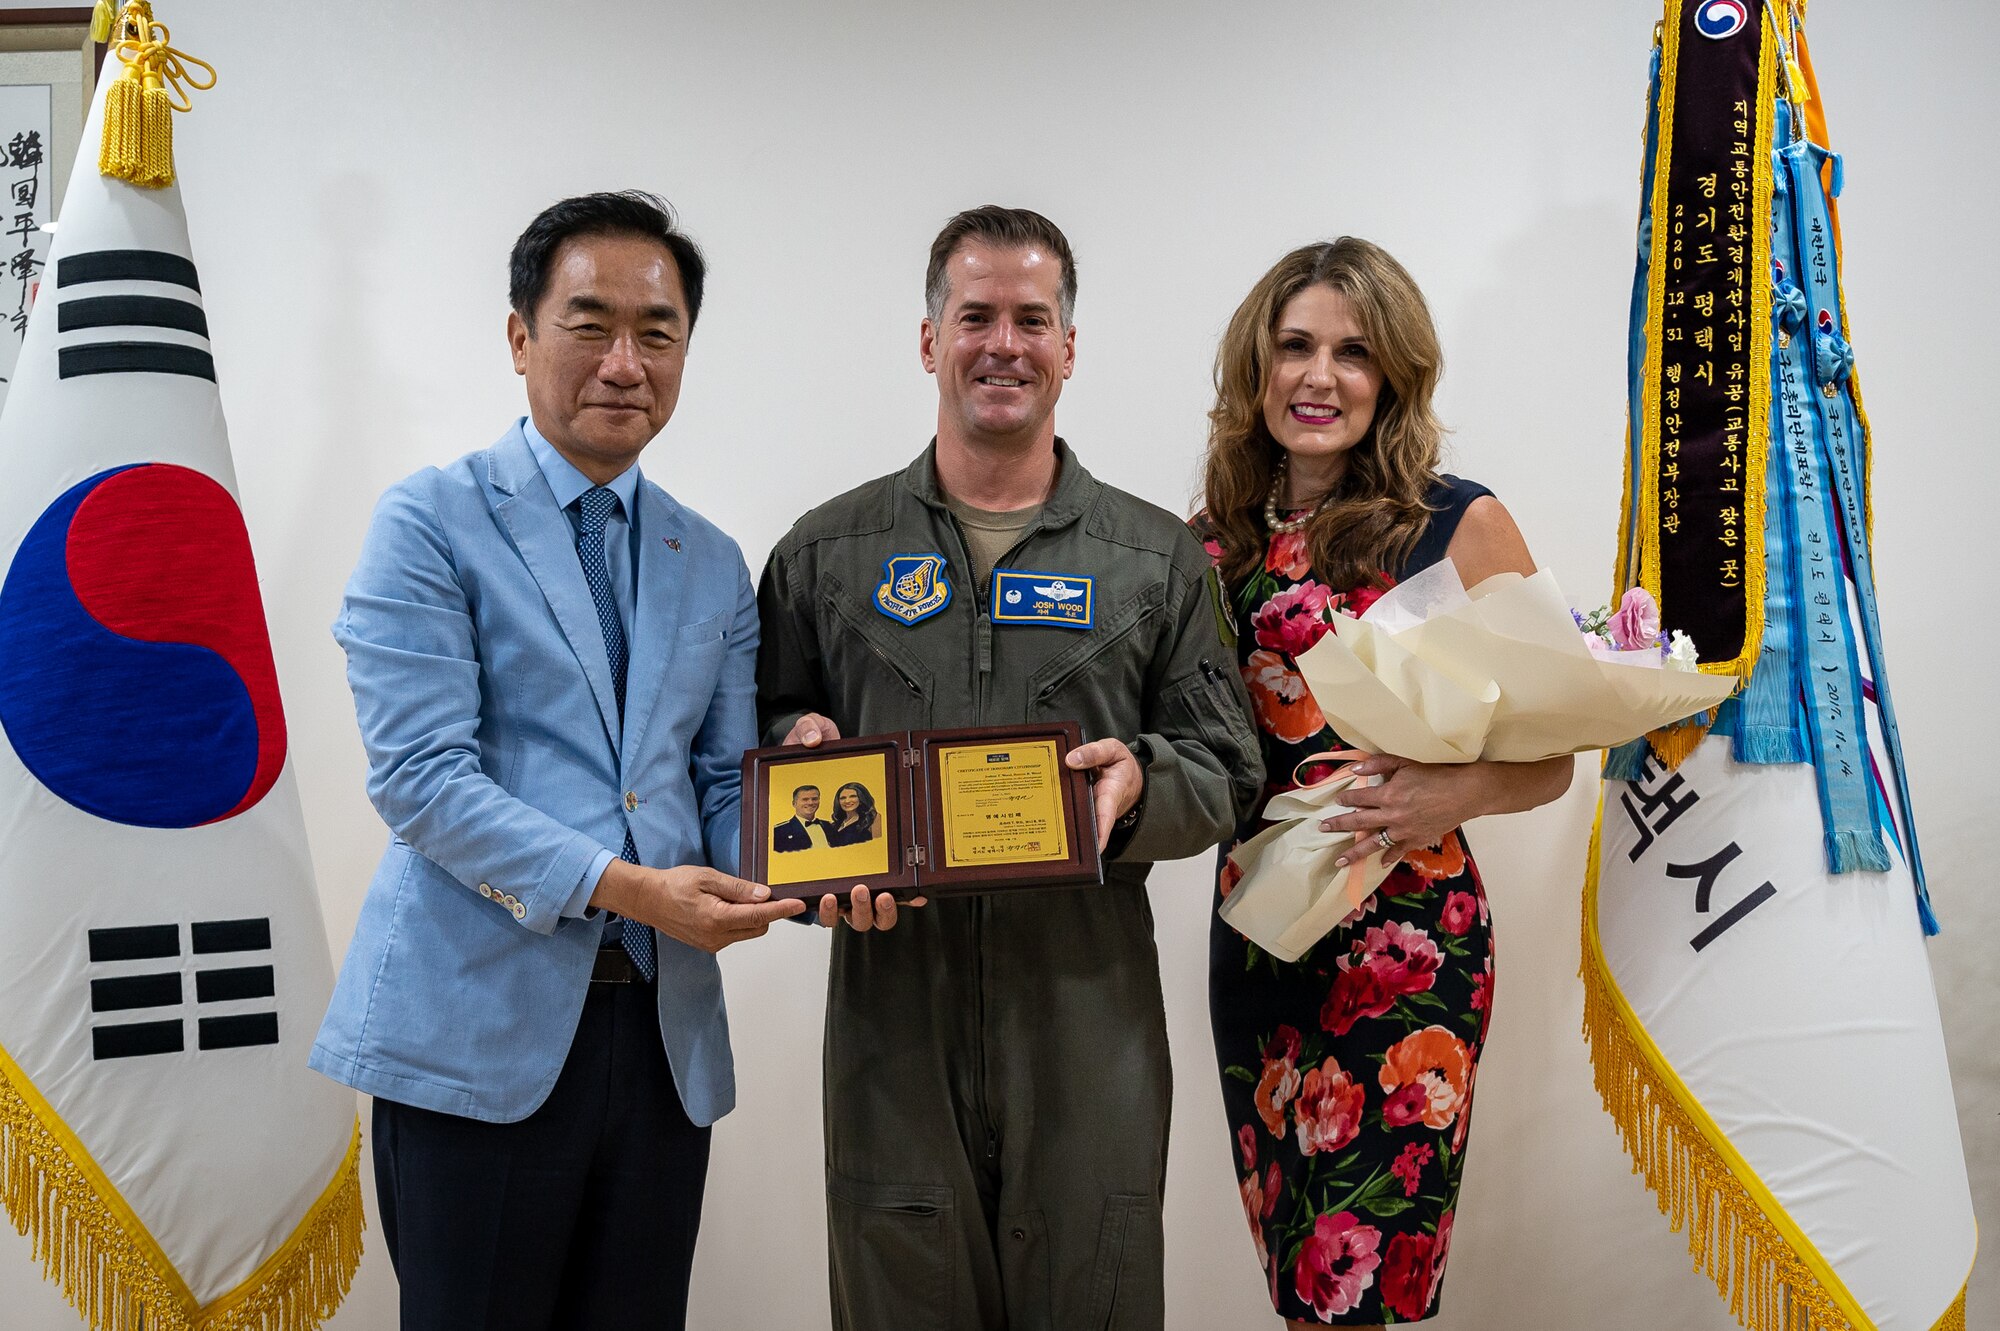 Mr. Jung, Jang Seon, left, Pyeongtaek City mayor, presents U.S. Air Force Col. Joshua Wood, middle, 51st Fighter Wing Commander, and his wife, Mrs. Bonnie Wood, with a plaque of honorary citizenship at Pyeongtaek City Hall, Republic of Korea, June 1, 2023. Wood has served as the 51 FW Commander for two years and is due to retire in July of 2023. (U.S. Air Force photo by Senior Airman Thomas Sjoberg)